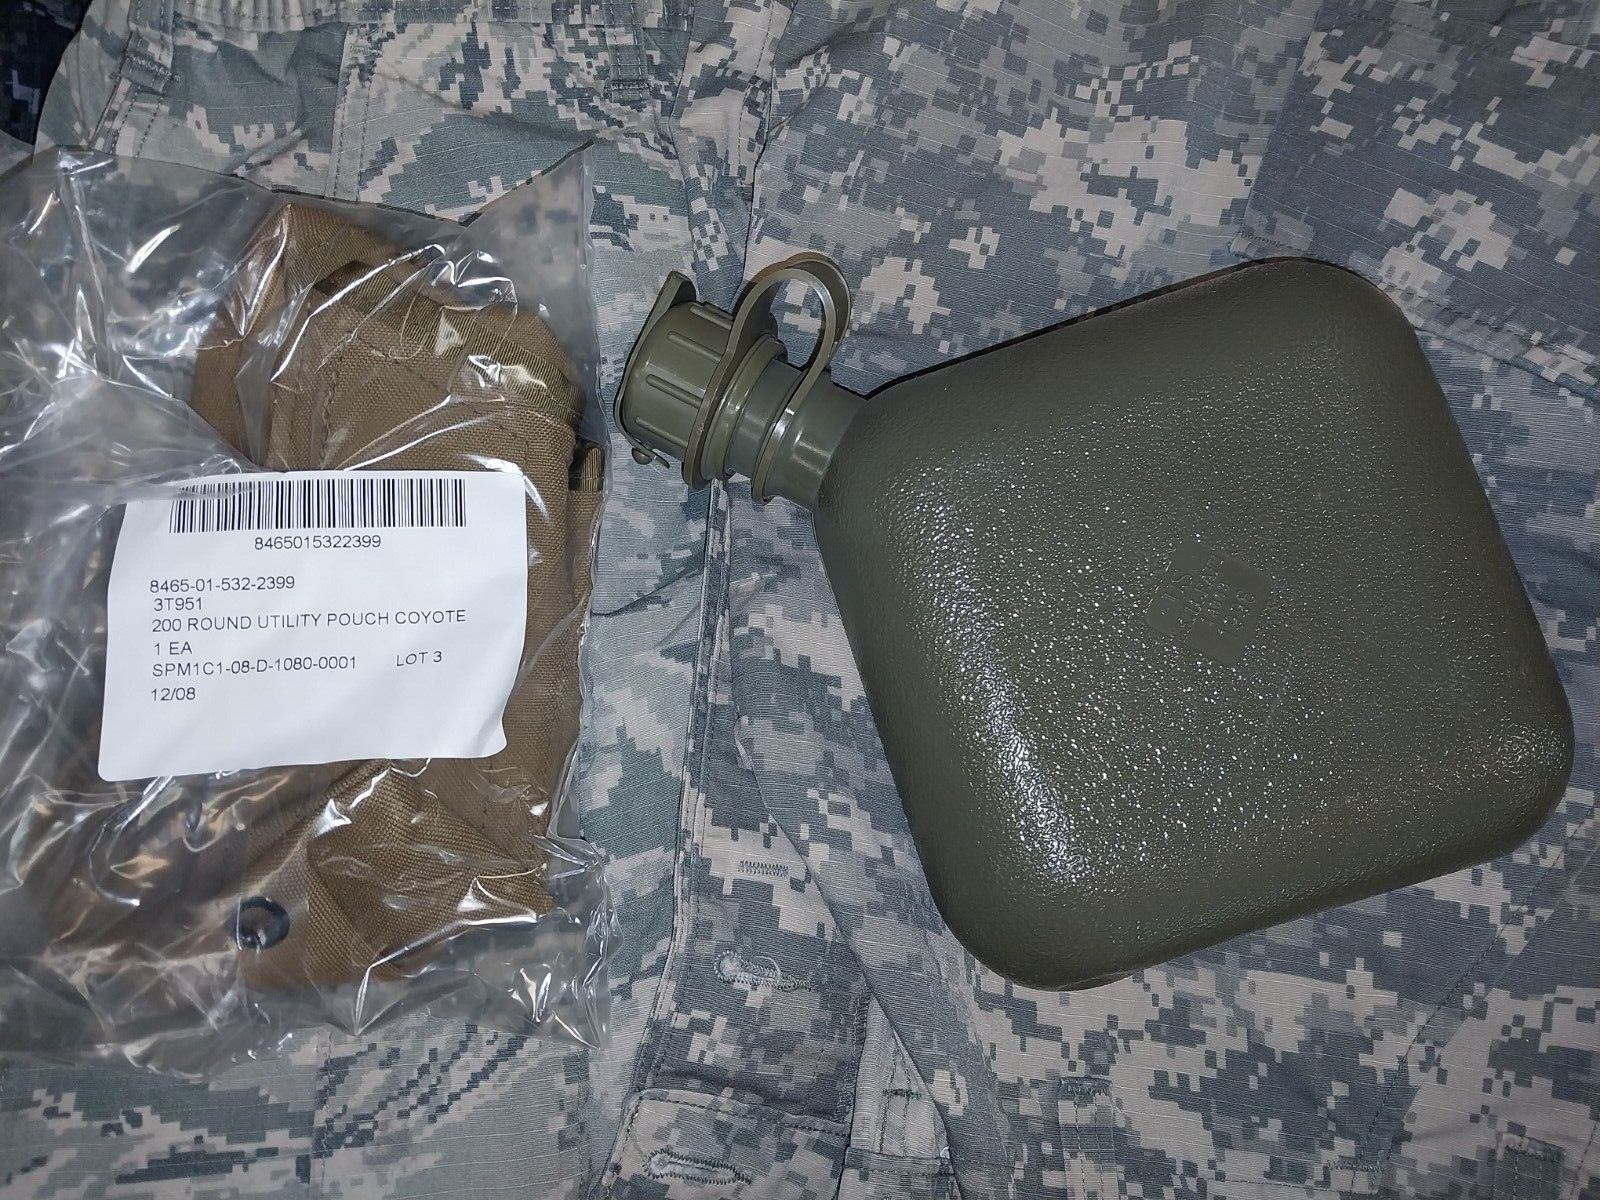 NEW US Military 2 Quart Canteen With NBC Cap and New Coyote Fitted Cover